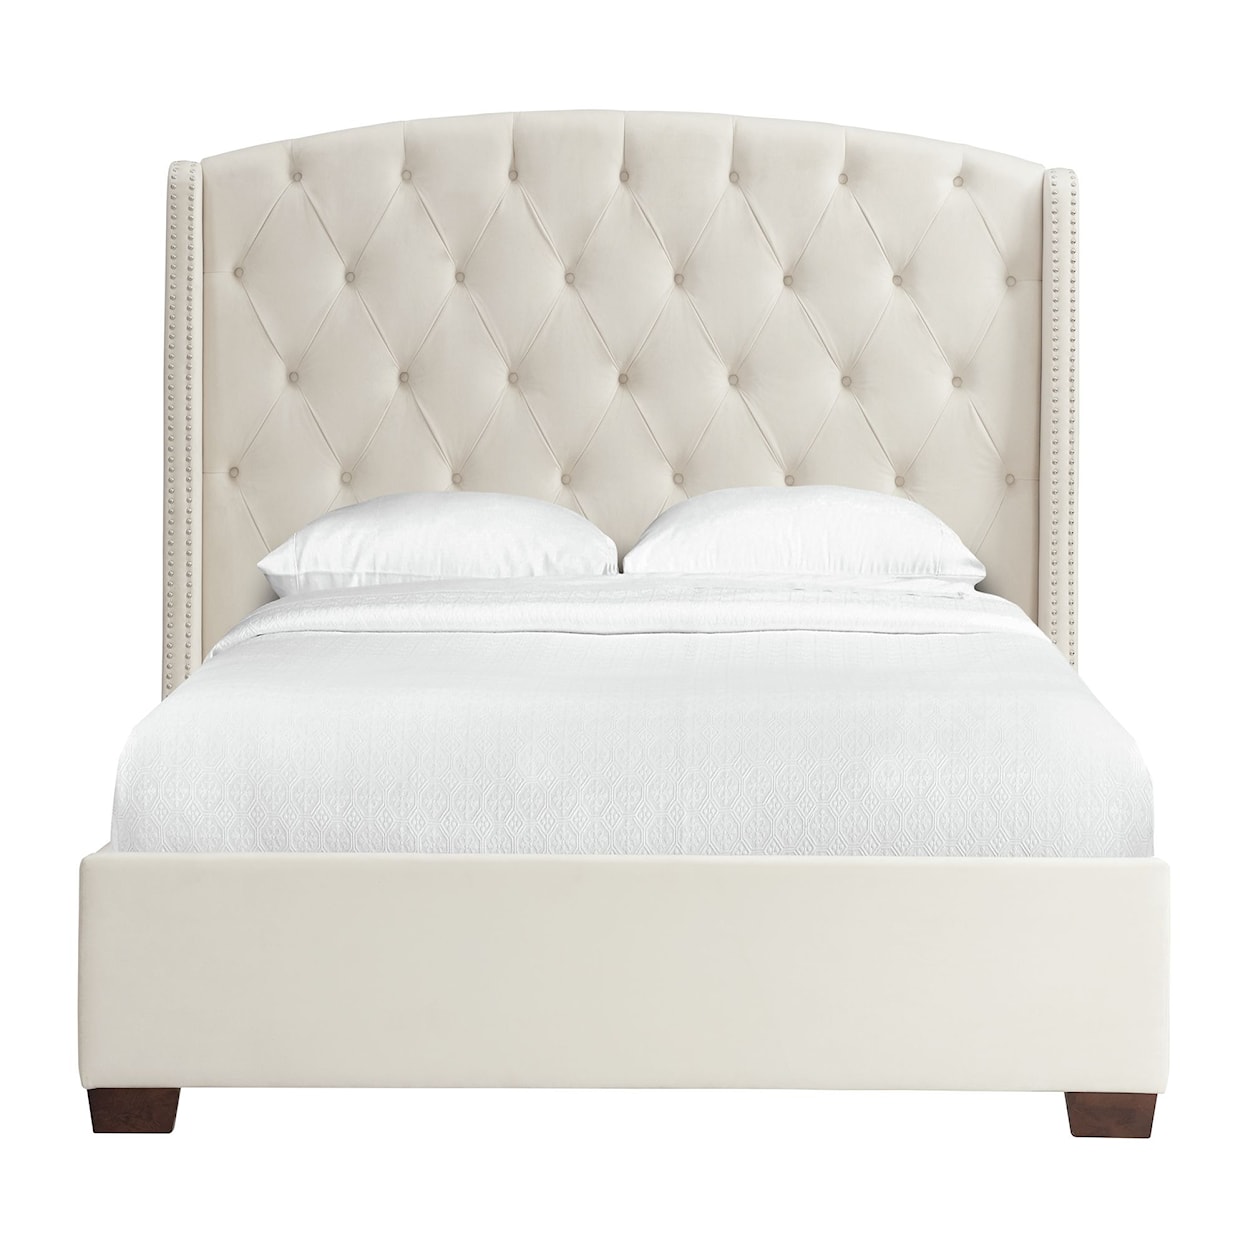 Elements International Foster King Bed